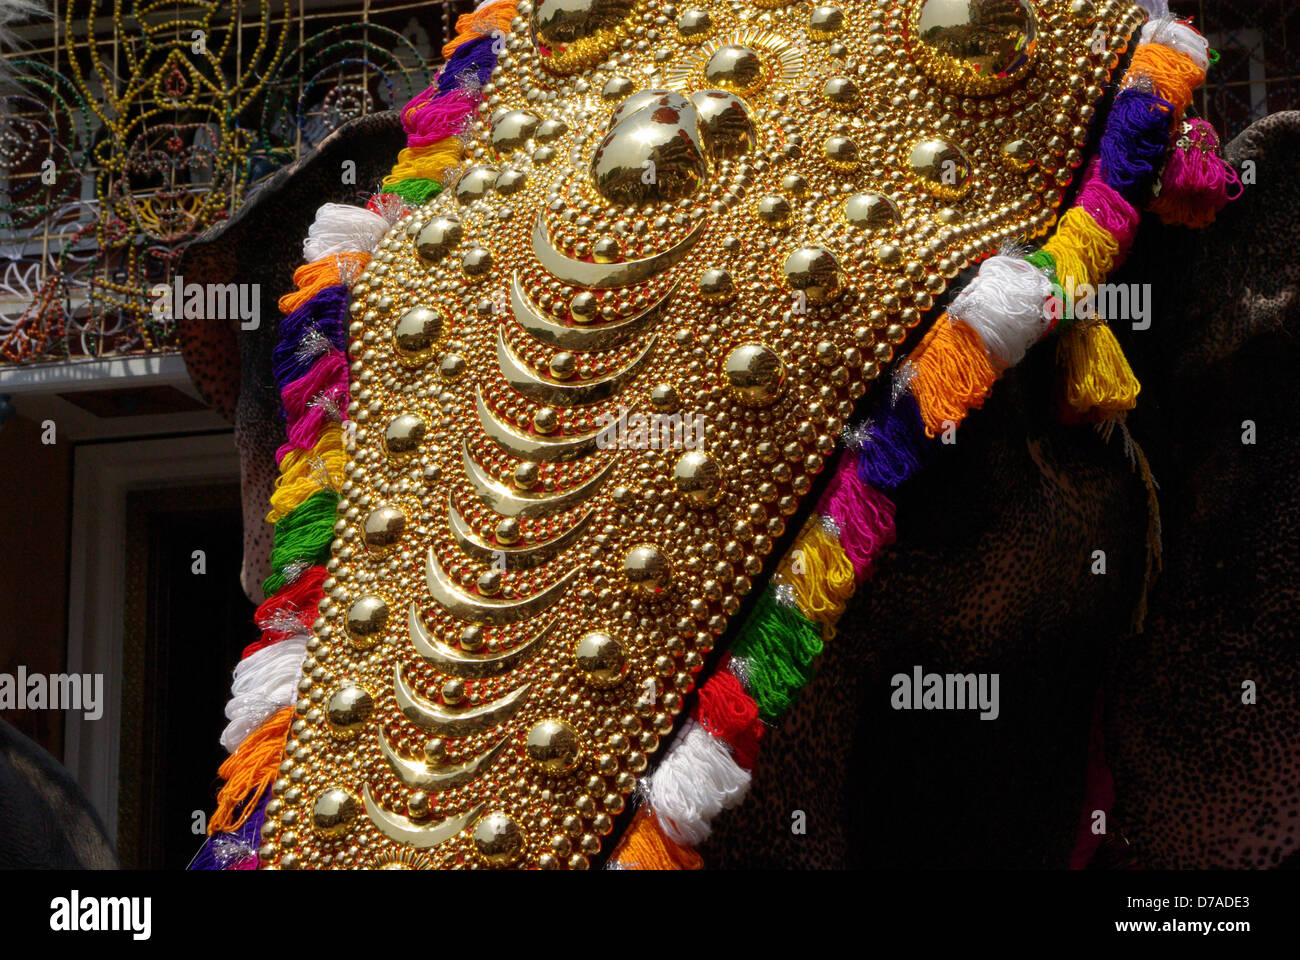 A caparisoned elephant in the famous temple festival of Kerala, Thrissur Pooram, which takes place in the month of April/May . Stock Photo